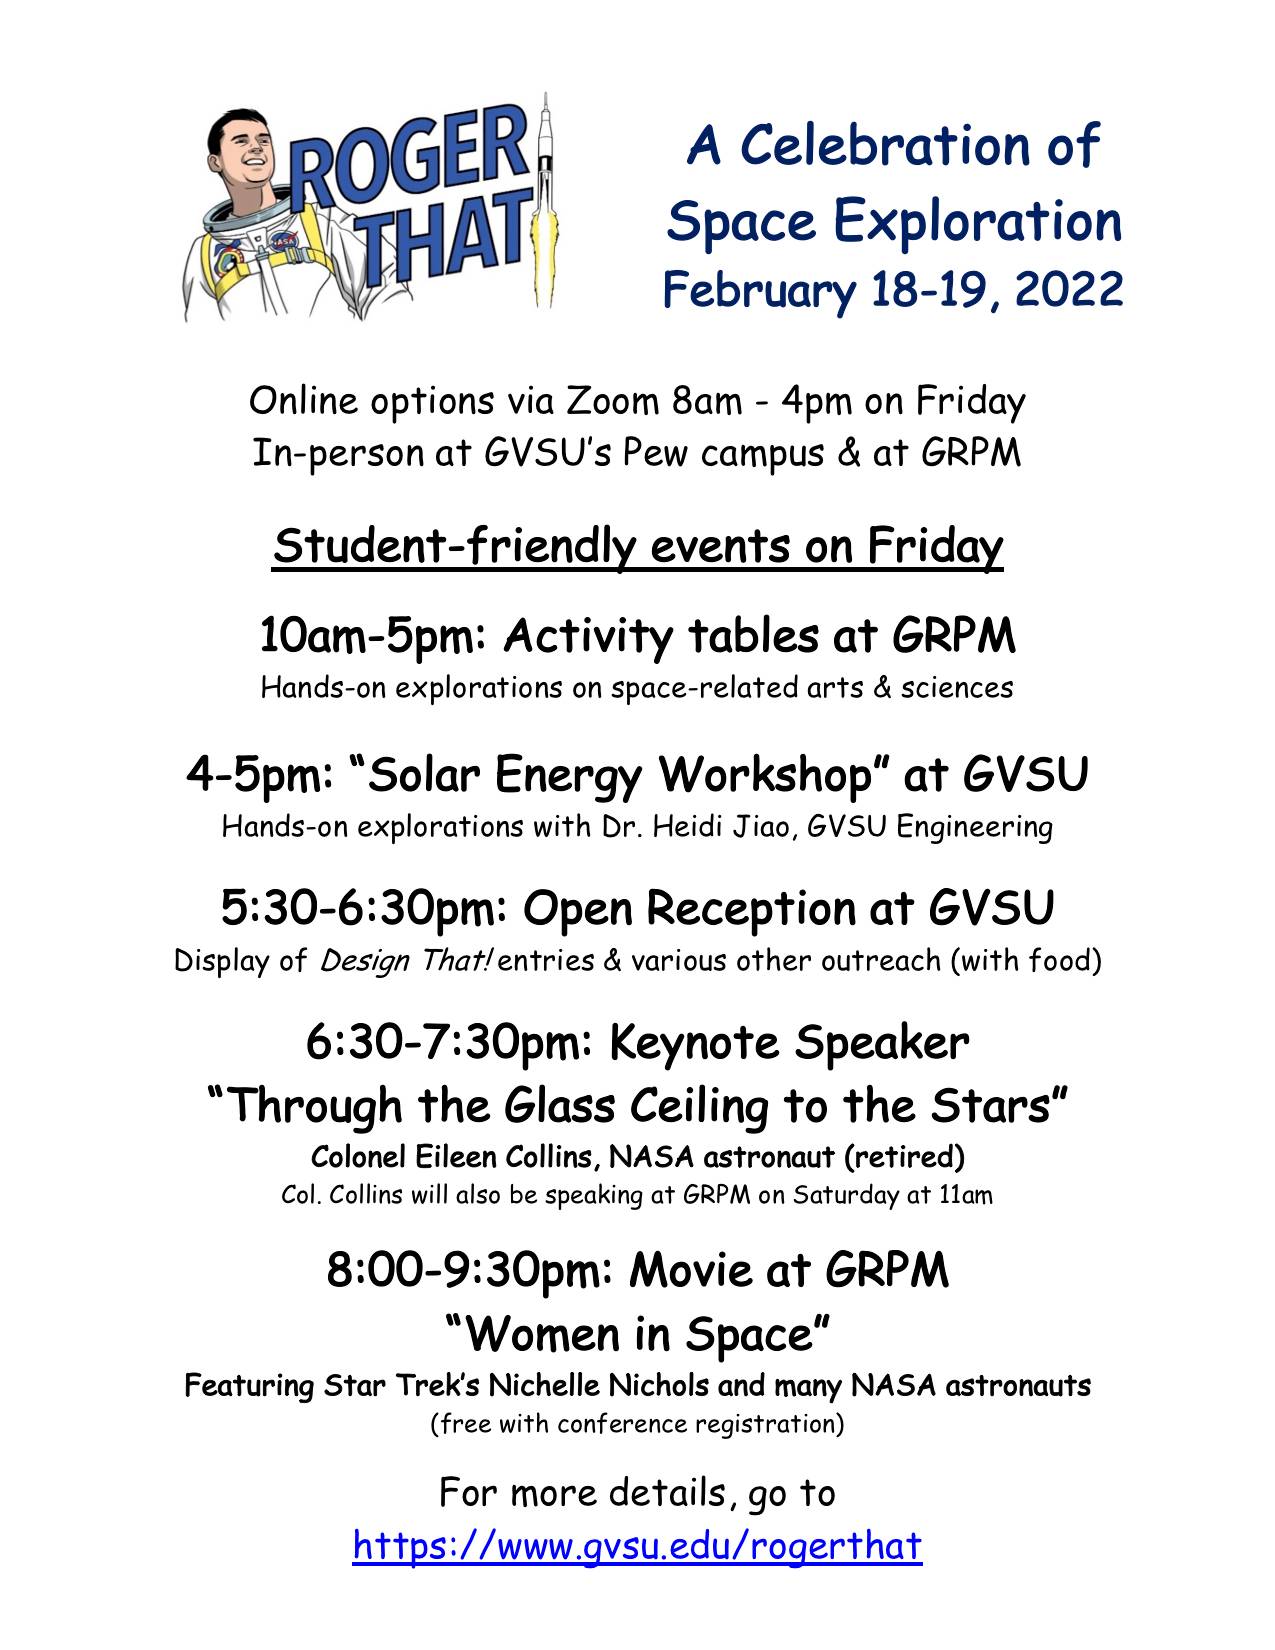 Online options via Zoom 8am - 4pm on Friday In-person at GVSU&#8217;s Pew campus & at GRPM  Student-friendly events on Friday  10am-5pm: Activity tables at GRPM Hands-on explorations on space-related arts & sciences  4-5pm: &#8220;Solar Energy Workshop&#8221; at GVSU Hands-on explorations with Dr. Heidi Jiao, GVSU Engineering  5:30-6:30pm: Open Reception at GVSU Display of Design That! entries & various other outreach (with food)  6:30-7:30pm: Keynote Speaker &#8220;Through the Glass Ceiling to the Stars&#8221; Colonel Eileen Collins, NASA astronaut (retired) Col. Collins will also be speaking at GRPM on Saturday at 11am 8:00-9:30pm: Movie at GRPM &#8220;Women in Space&#8221; Featuring Star Trek&#8217;s Nichelle Nichols and many NASA astronauts  (free with conference registration) For more details, go to https://www.gvsu.edu/rogerthat